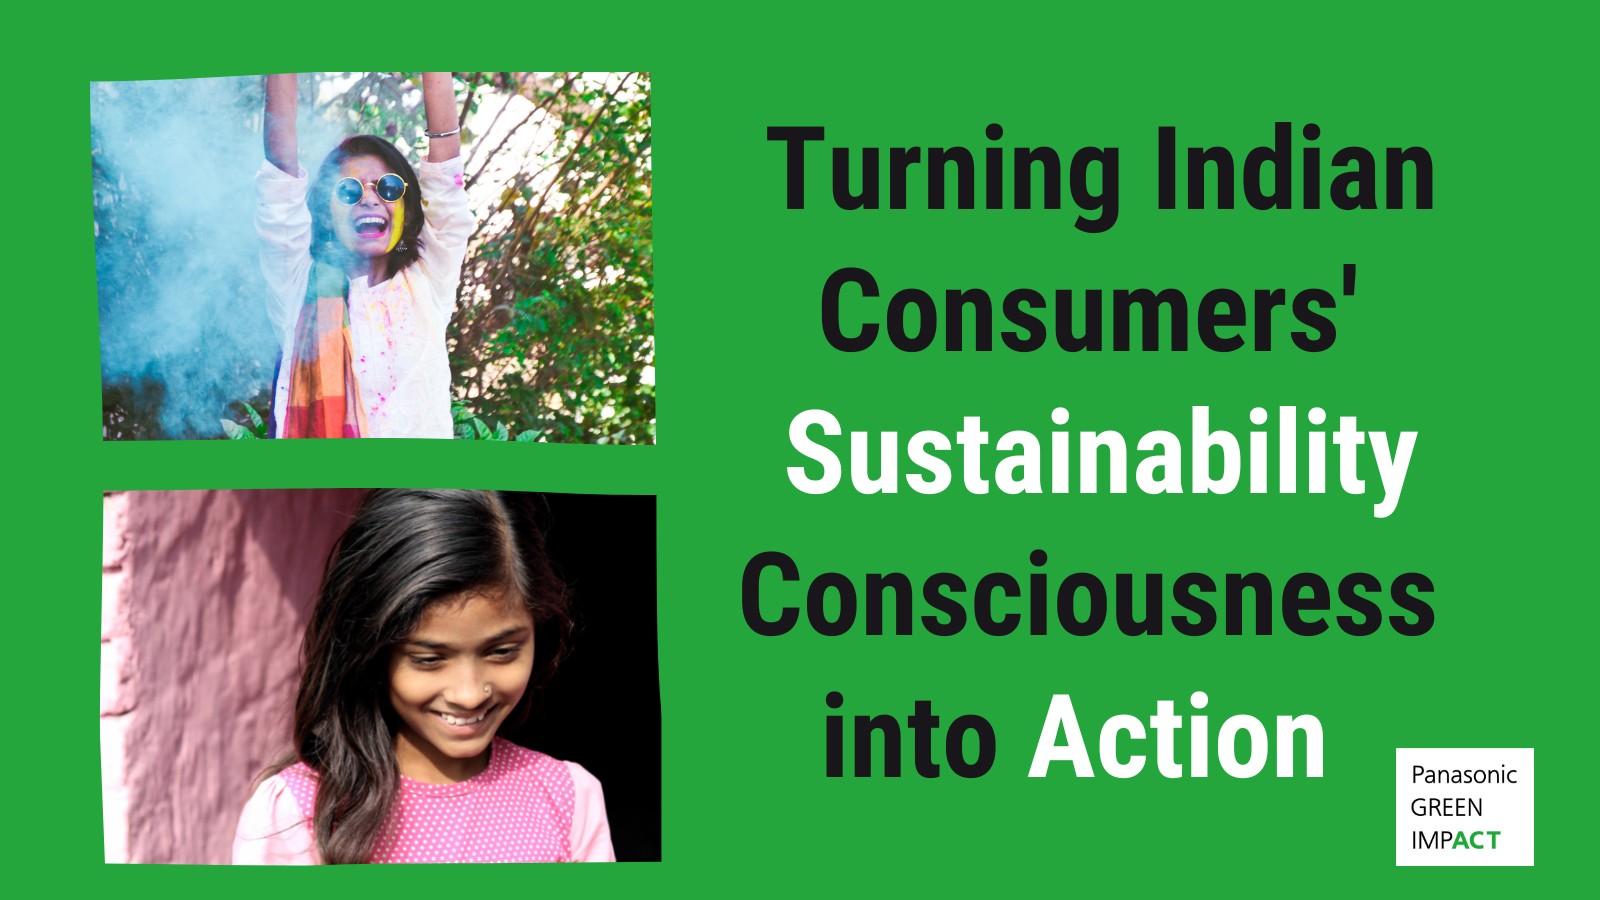 Panasonic Empowers Indian Consumers to Turn Sustainability Consciousness into Action